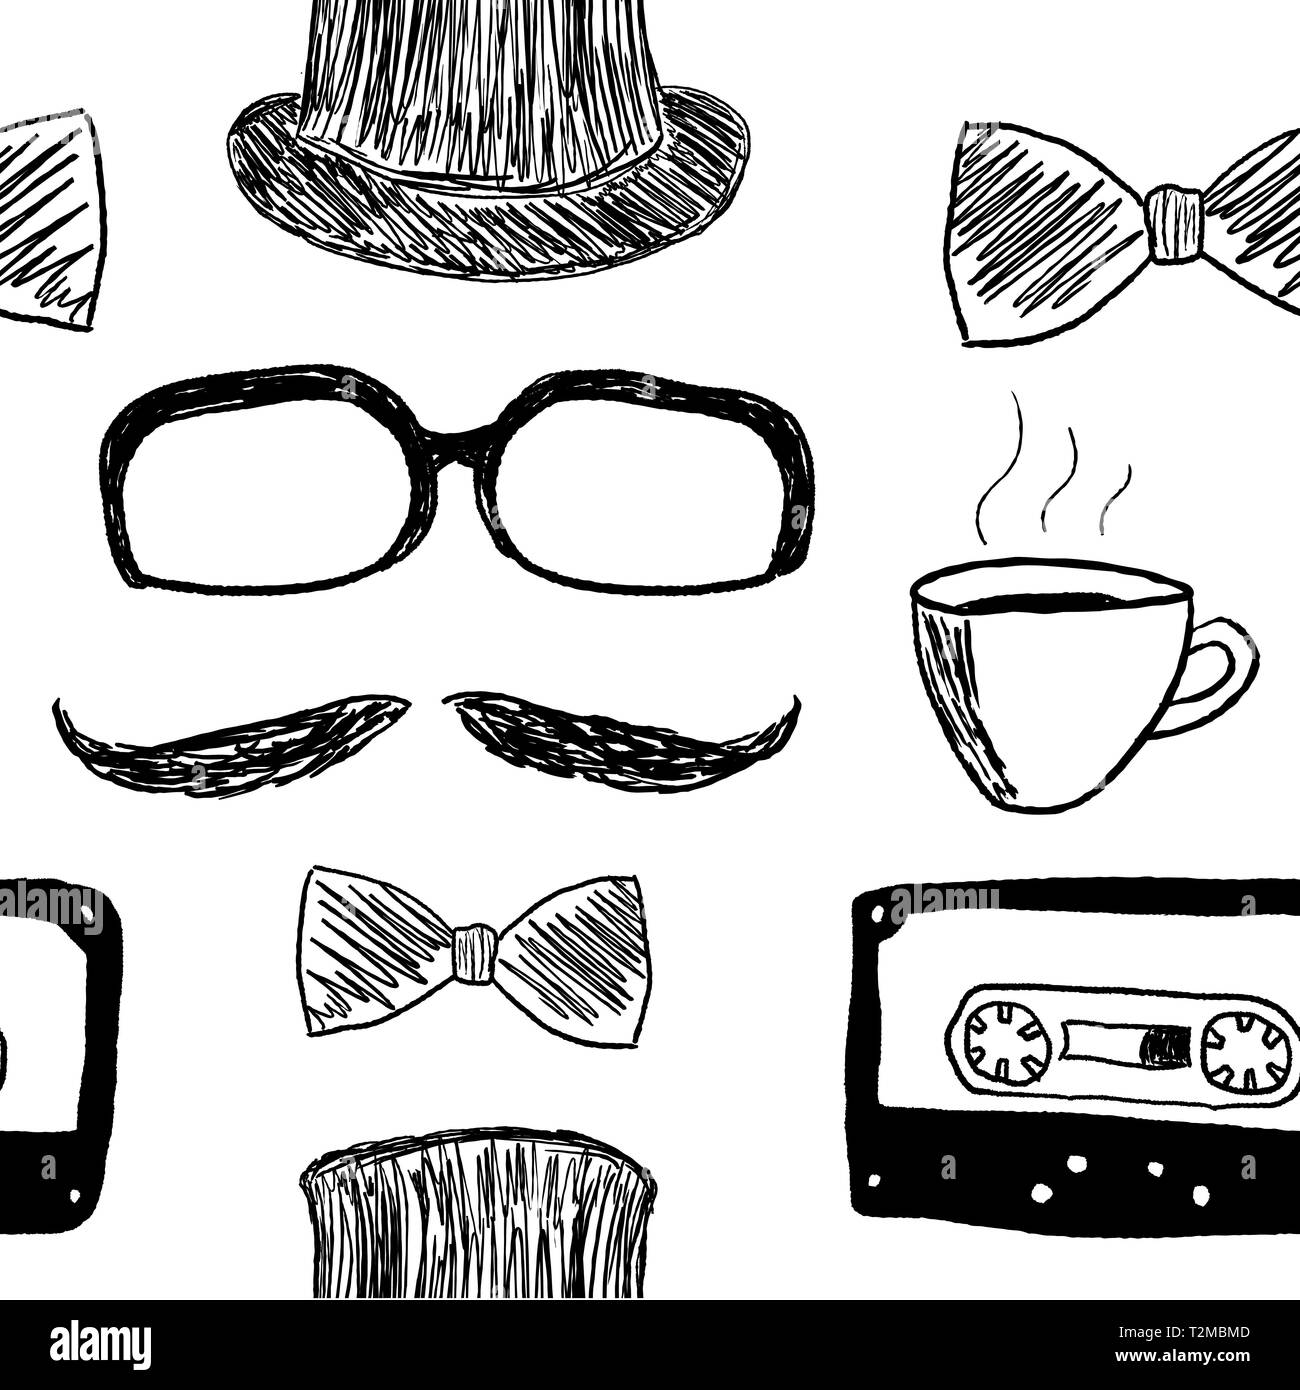 Hipster background with mustache and audio cassette tapes - seamless texture vector illustration. Stock Vector